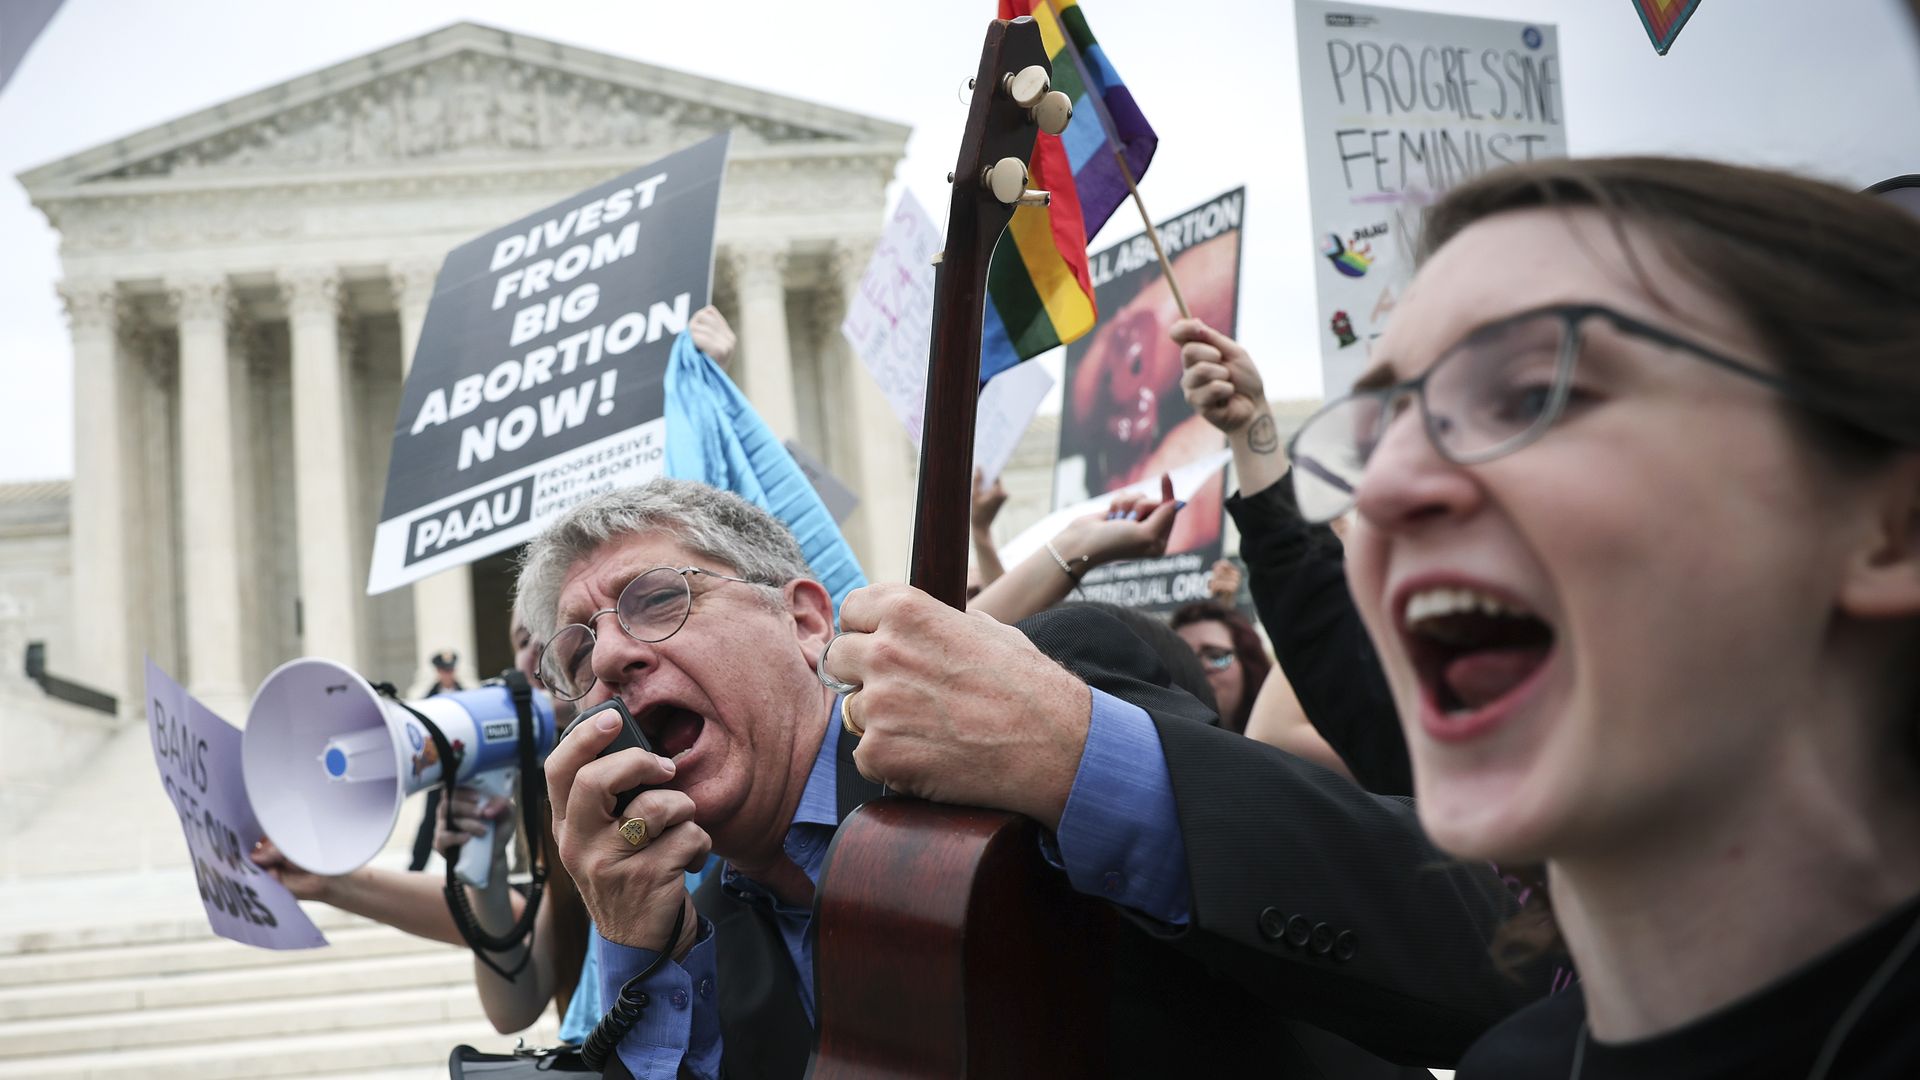 Protestors are seen outside the Supreme Court after a draft decision leaked showing it overturning Roe v. Wade.